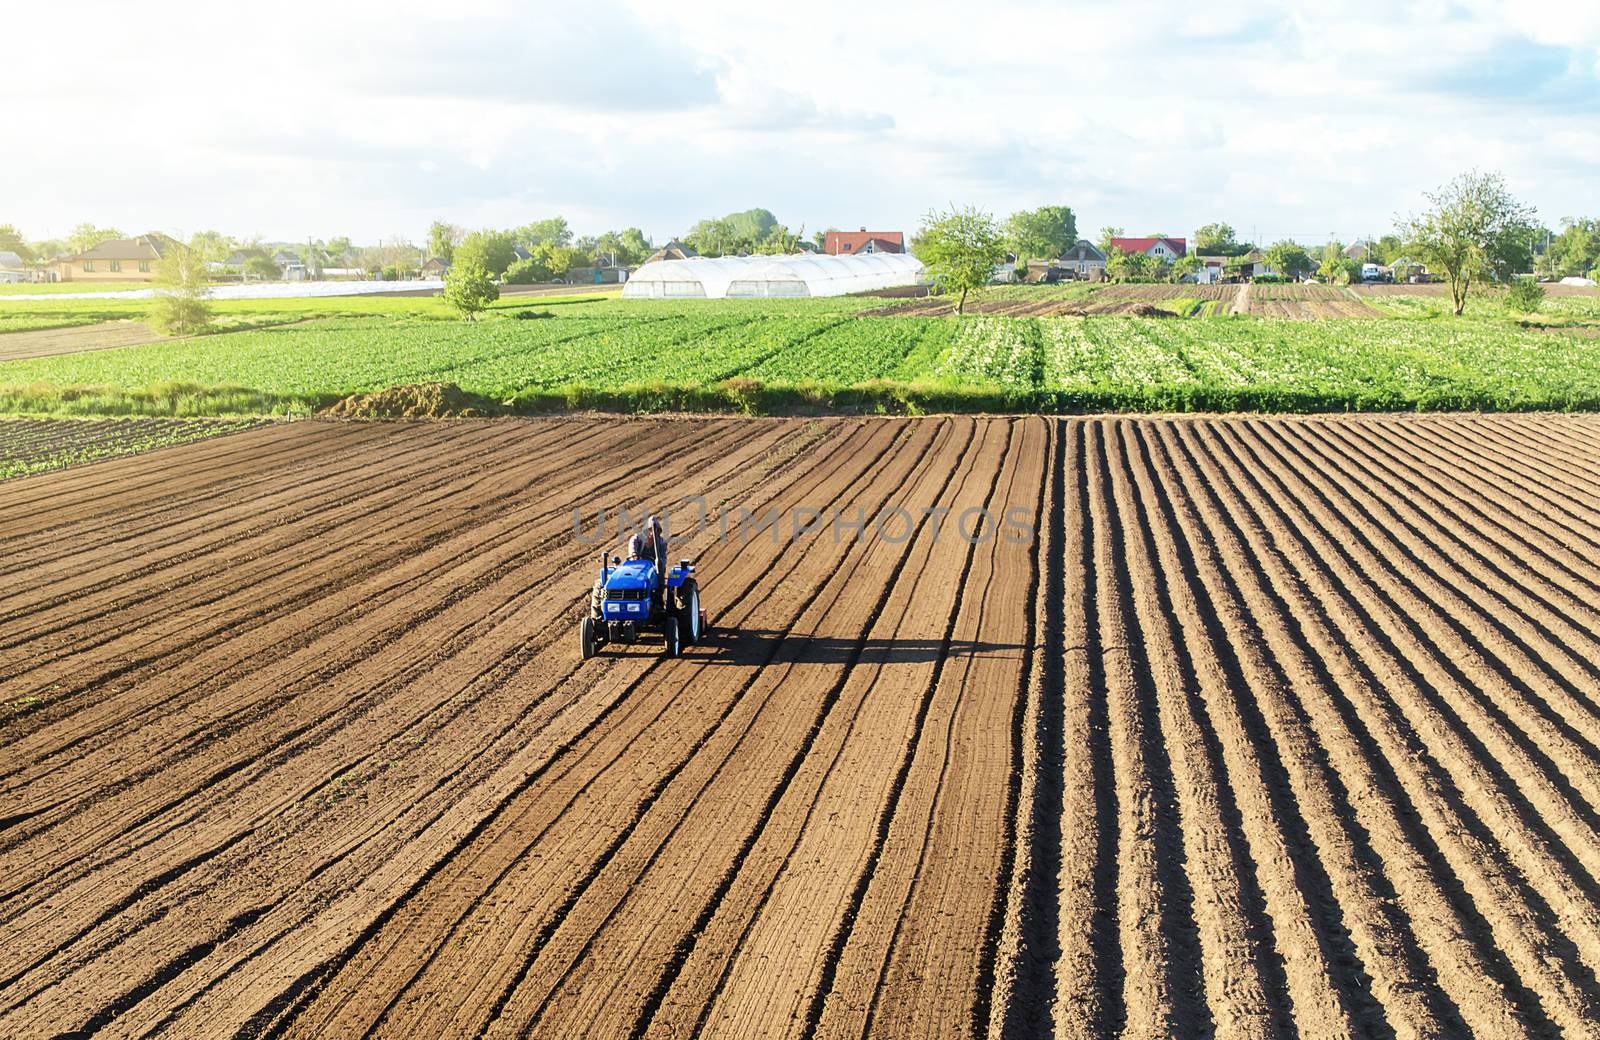 Farmer on a tractor cultivates land after harvesting. Mechanization, development of agricultural technologies. Grinding loosening plowing crumbling soil for further sowing by cultivated plants.